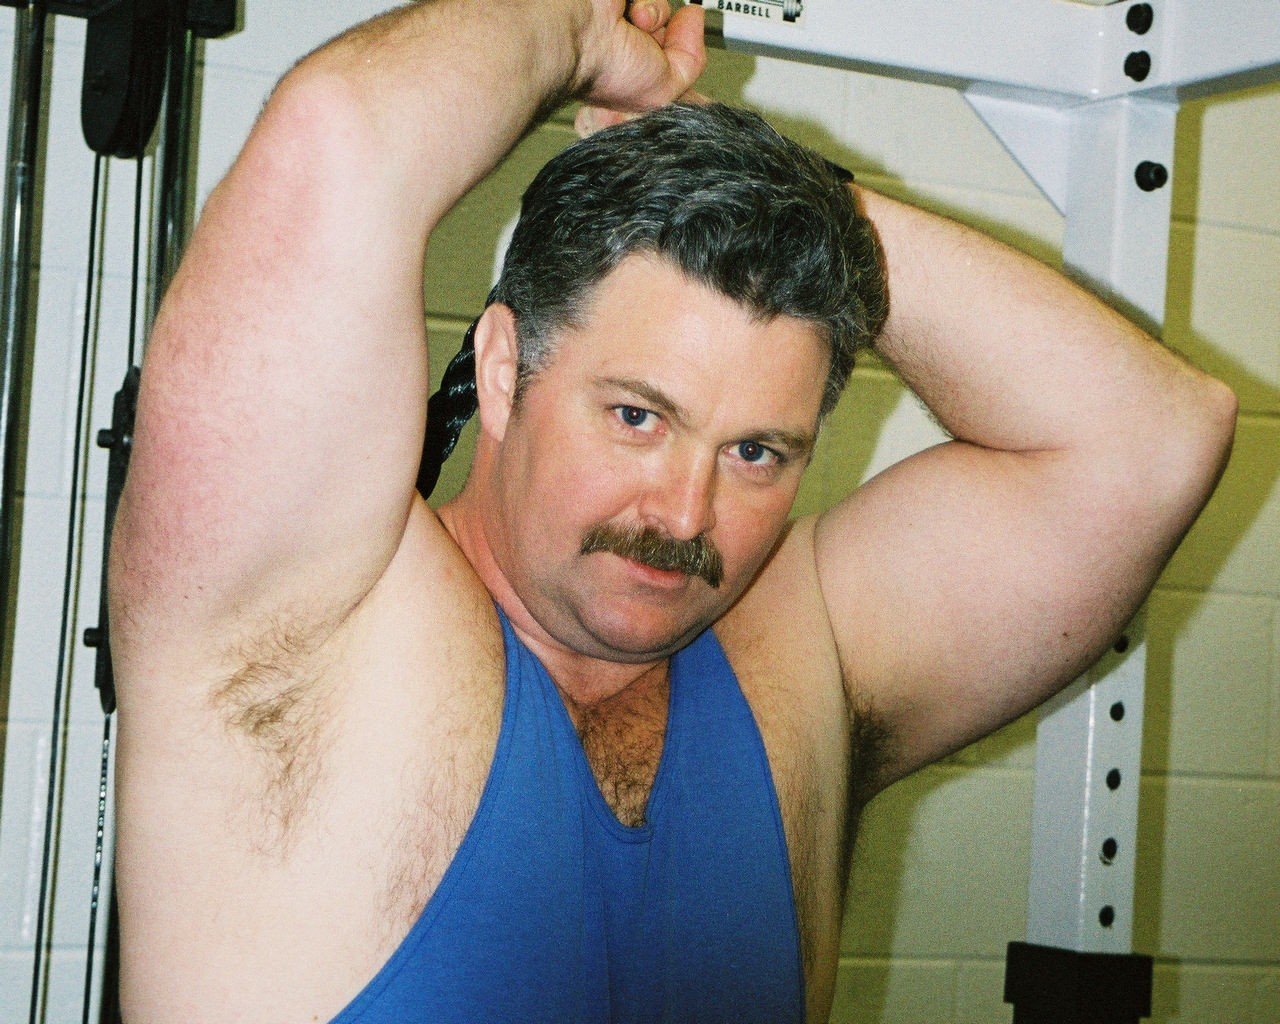 Photo by Hairy Musclebears with the username @hairymusclebears,  July 6, 2019 at 3:51 AM. The post is about the topic GayTumblr and the text says 'Hairy Moustache Musclebear Daddy from USAFUR.com galleries #gaycountryman #gayredneck #gaymodel #gaymen #gaydude #gaybearsandcubs #bearpride #beardedhomo #leatherpig #instabear #beardedcub #sexycub #thebeardedhomo #beardedhomo #bearsofinstagram #gaybody..'